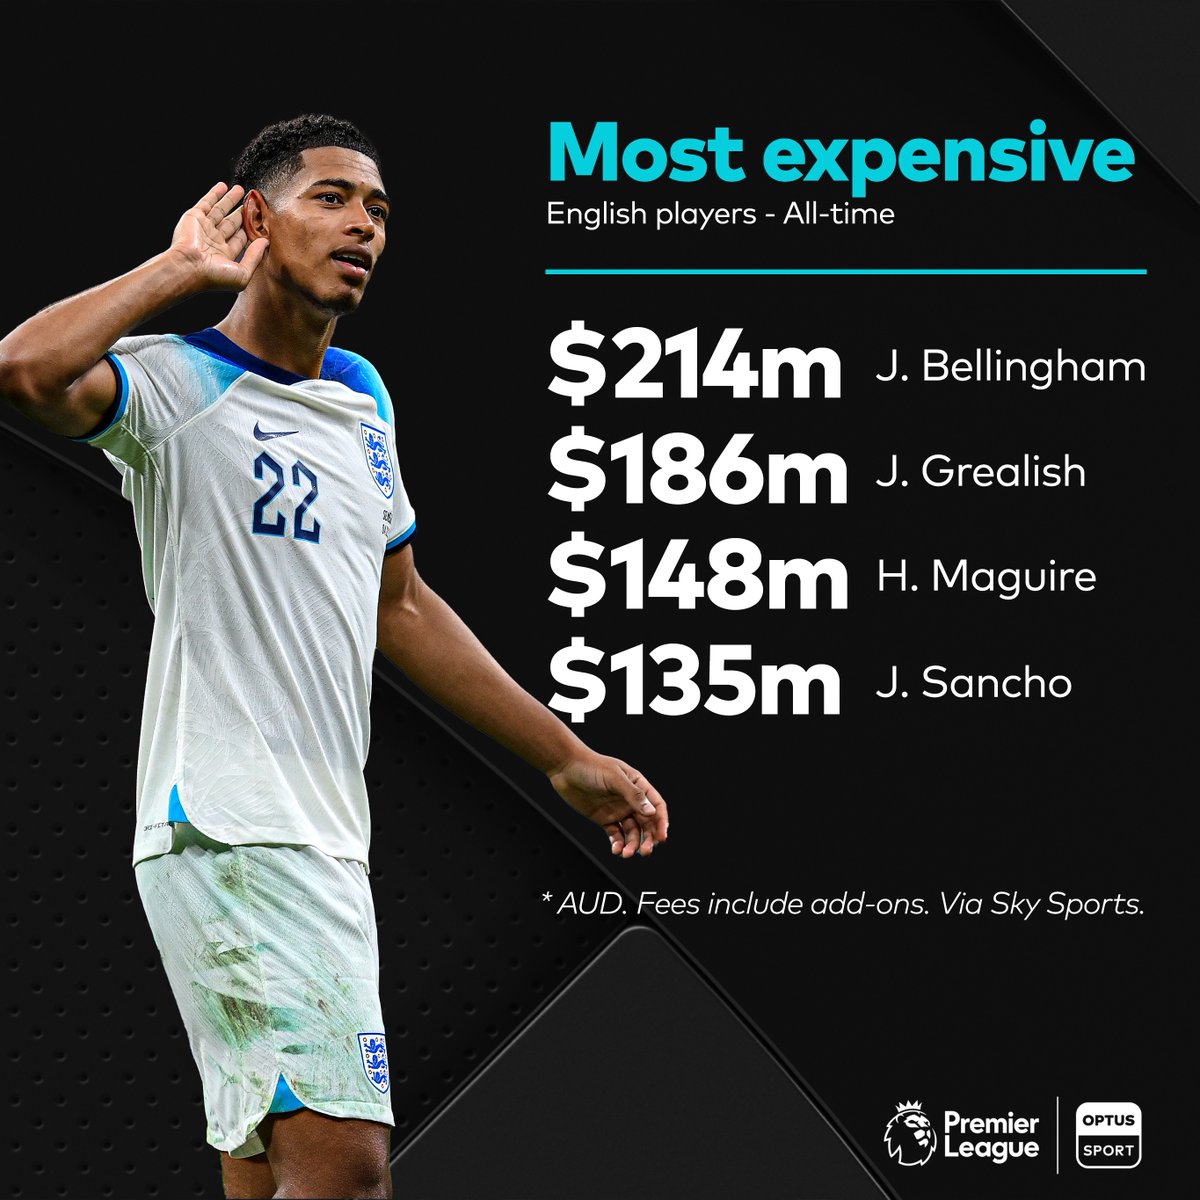 Real Madrid break the all-time English record 💰

Jude Bellingham is now England's most expensive player with his move to #LaLiga confirmed 🤑

#OptusSport